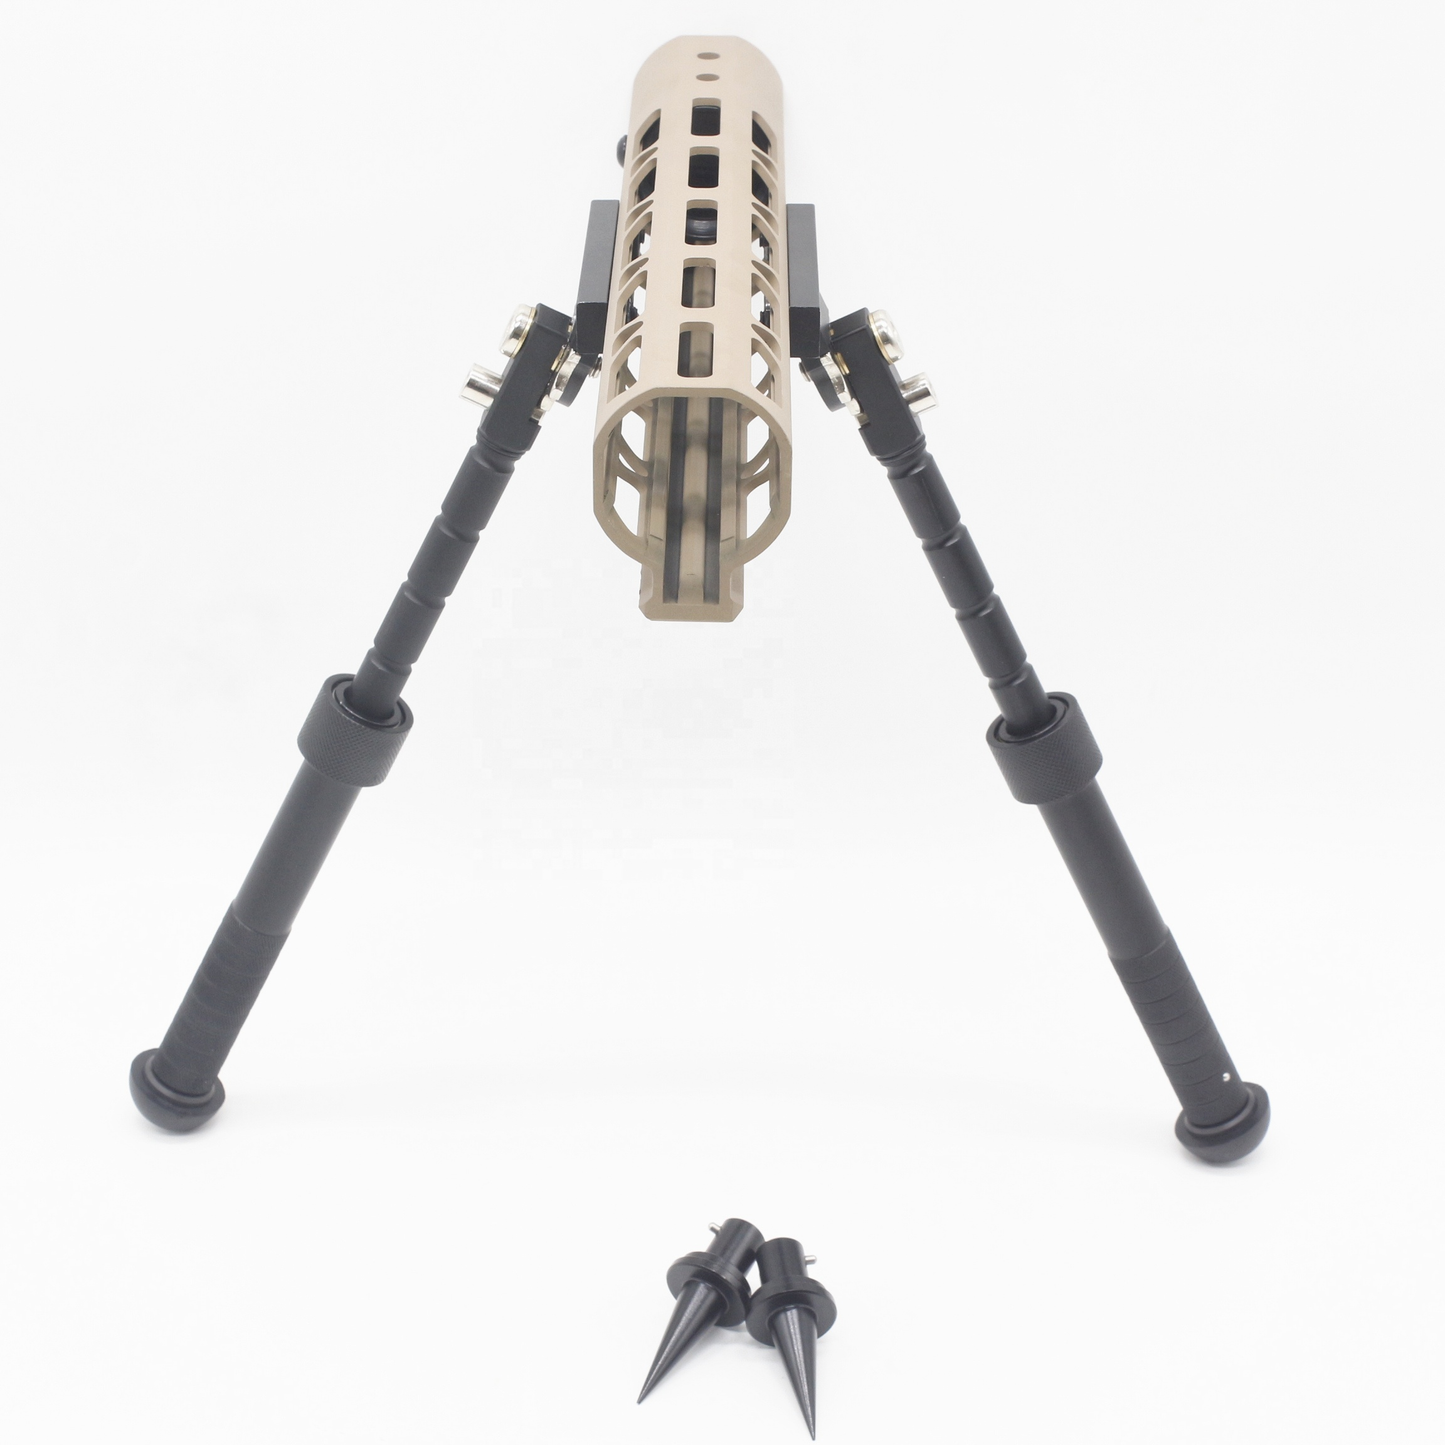 V8 Mlok Split Tactical Gun Tripod with Rail Mount Adapter Adjustable Length Shooting Stand Hunting Accessories